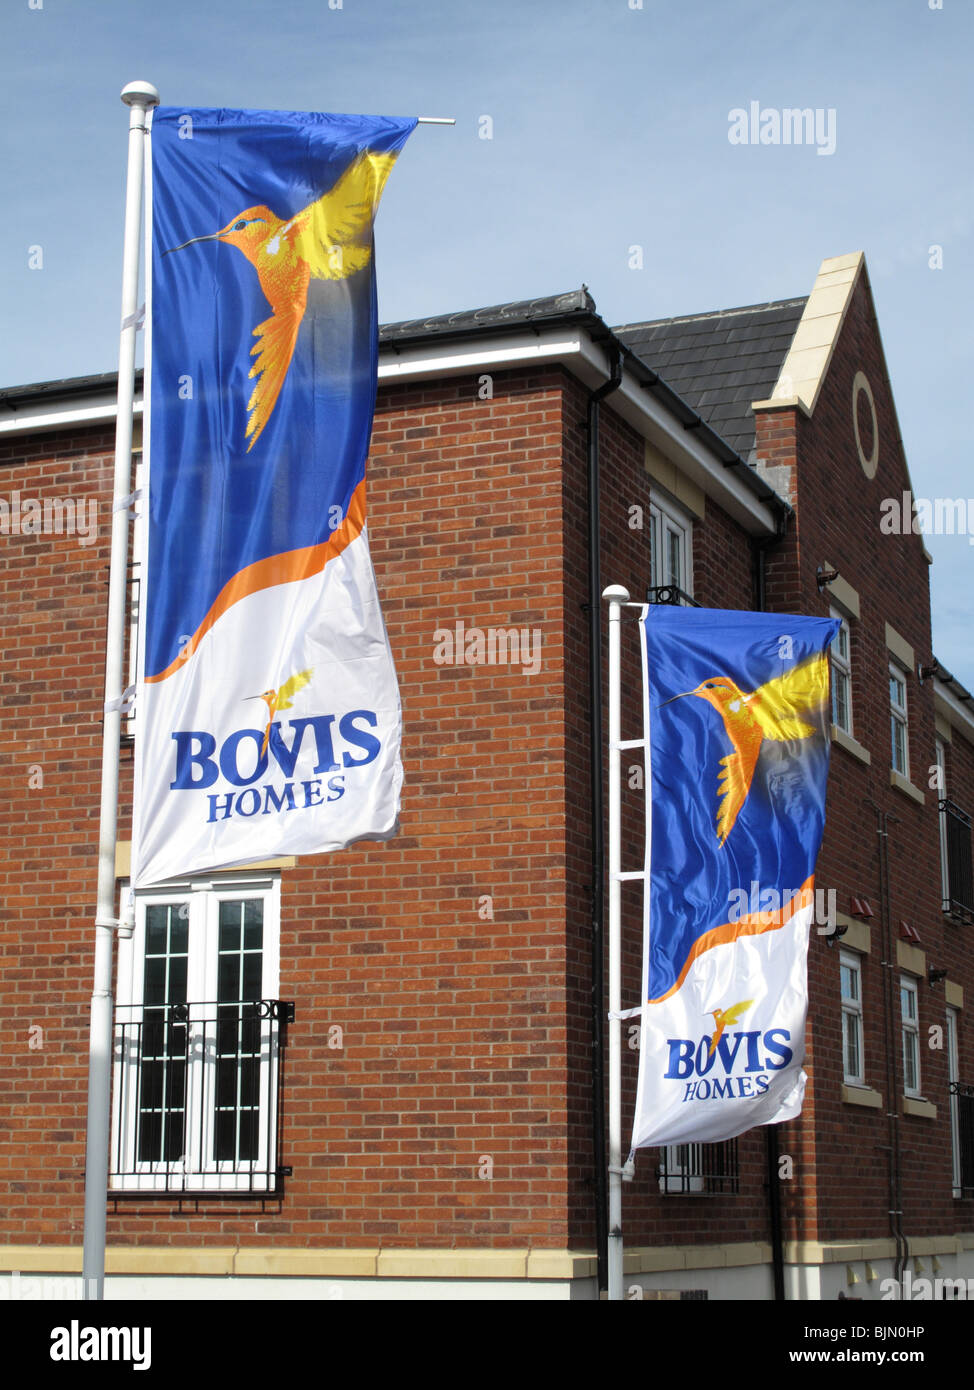 A Bovis Homes new housing estate in the U.K. Stock Photo